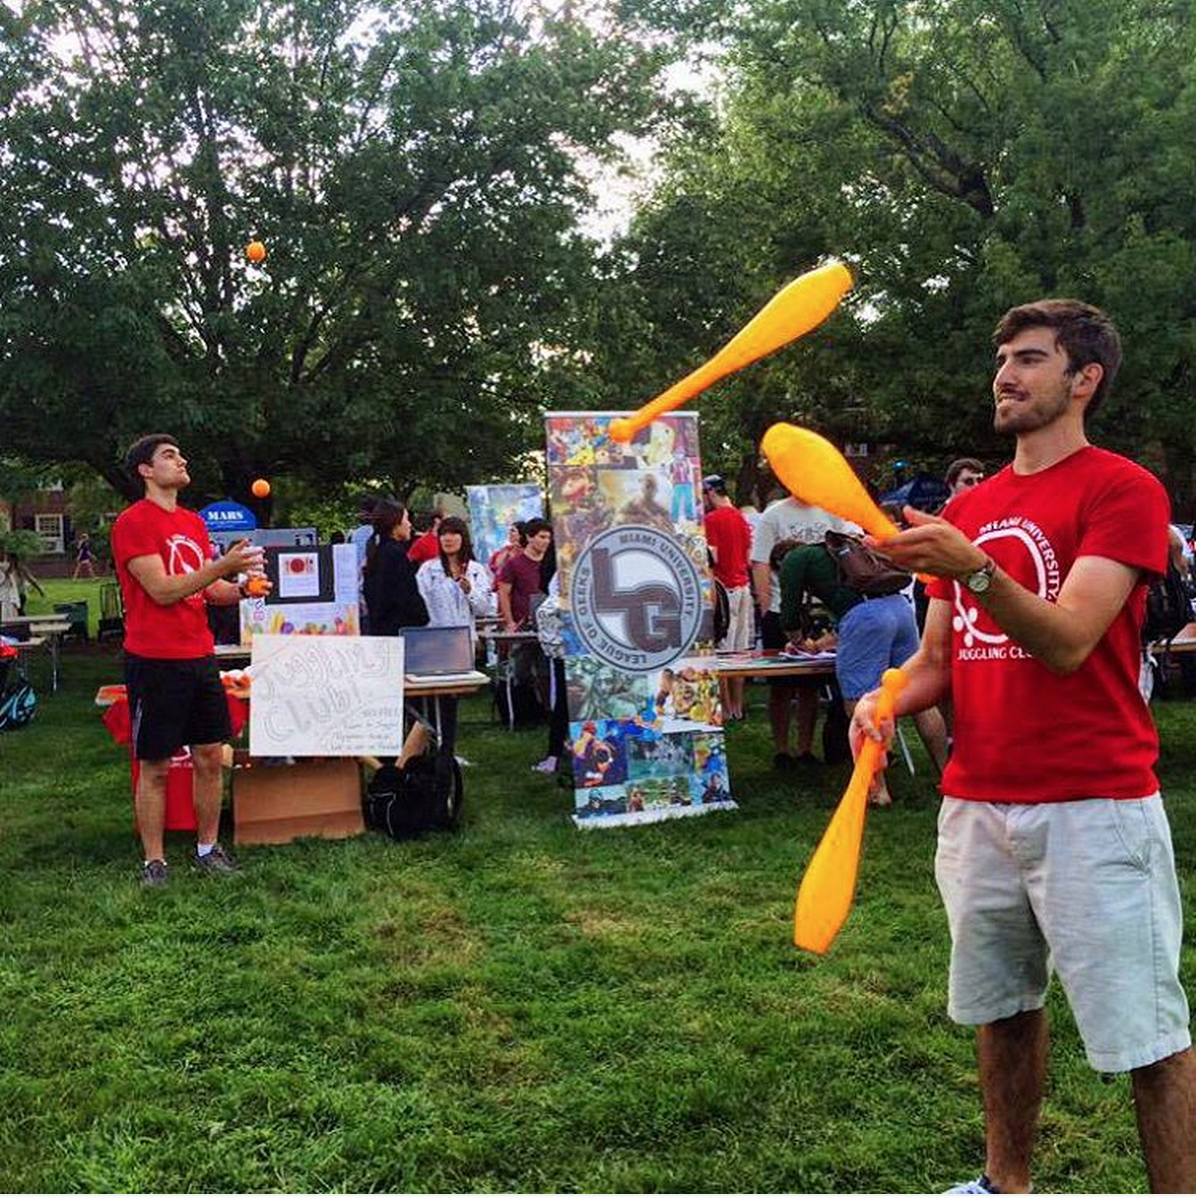  Two students from Miami's Juggling Club juggle during the Megafair event on campus.